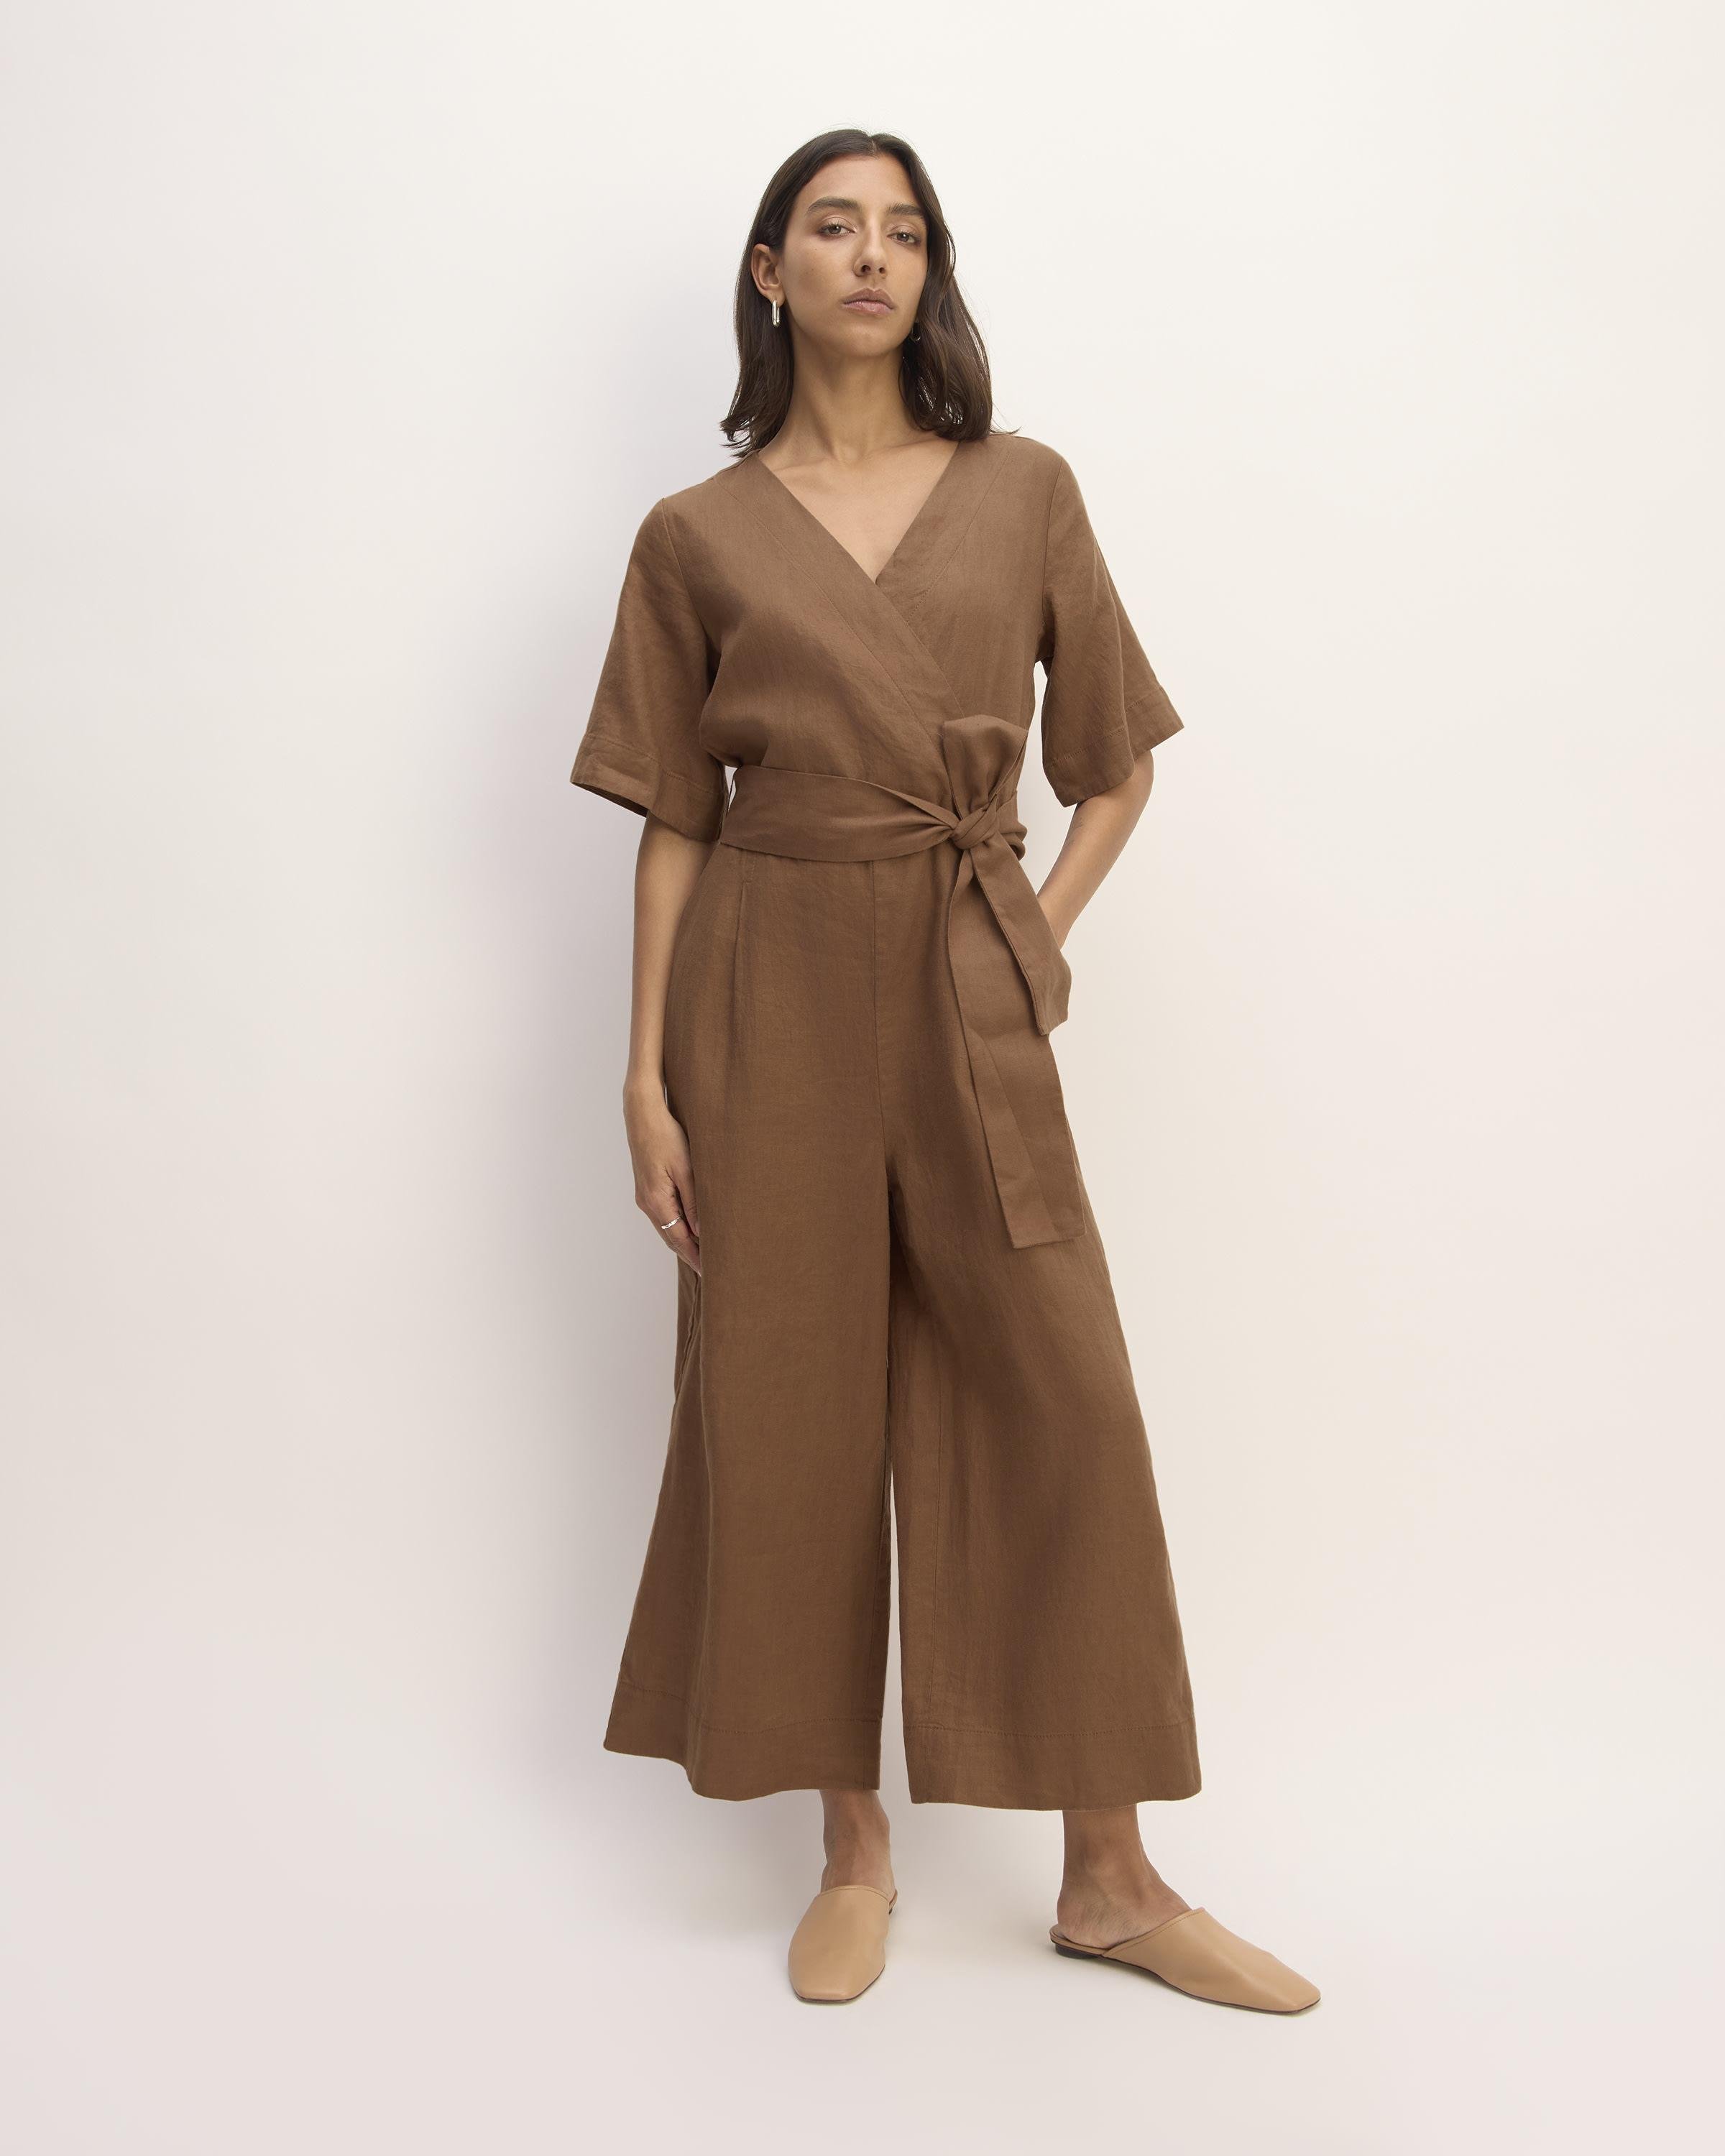 The Linen Cross-Front Jumpsuit by EVERLANE